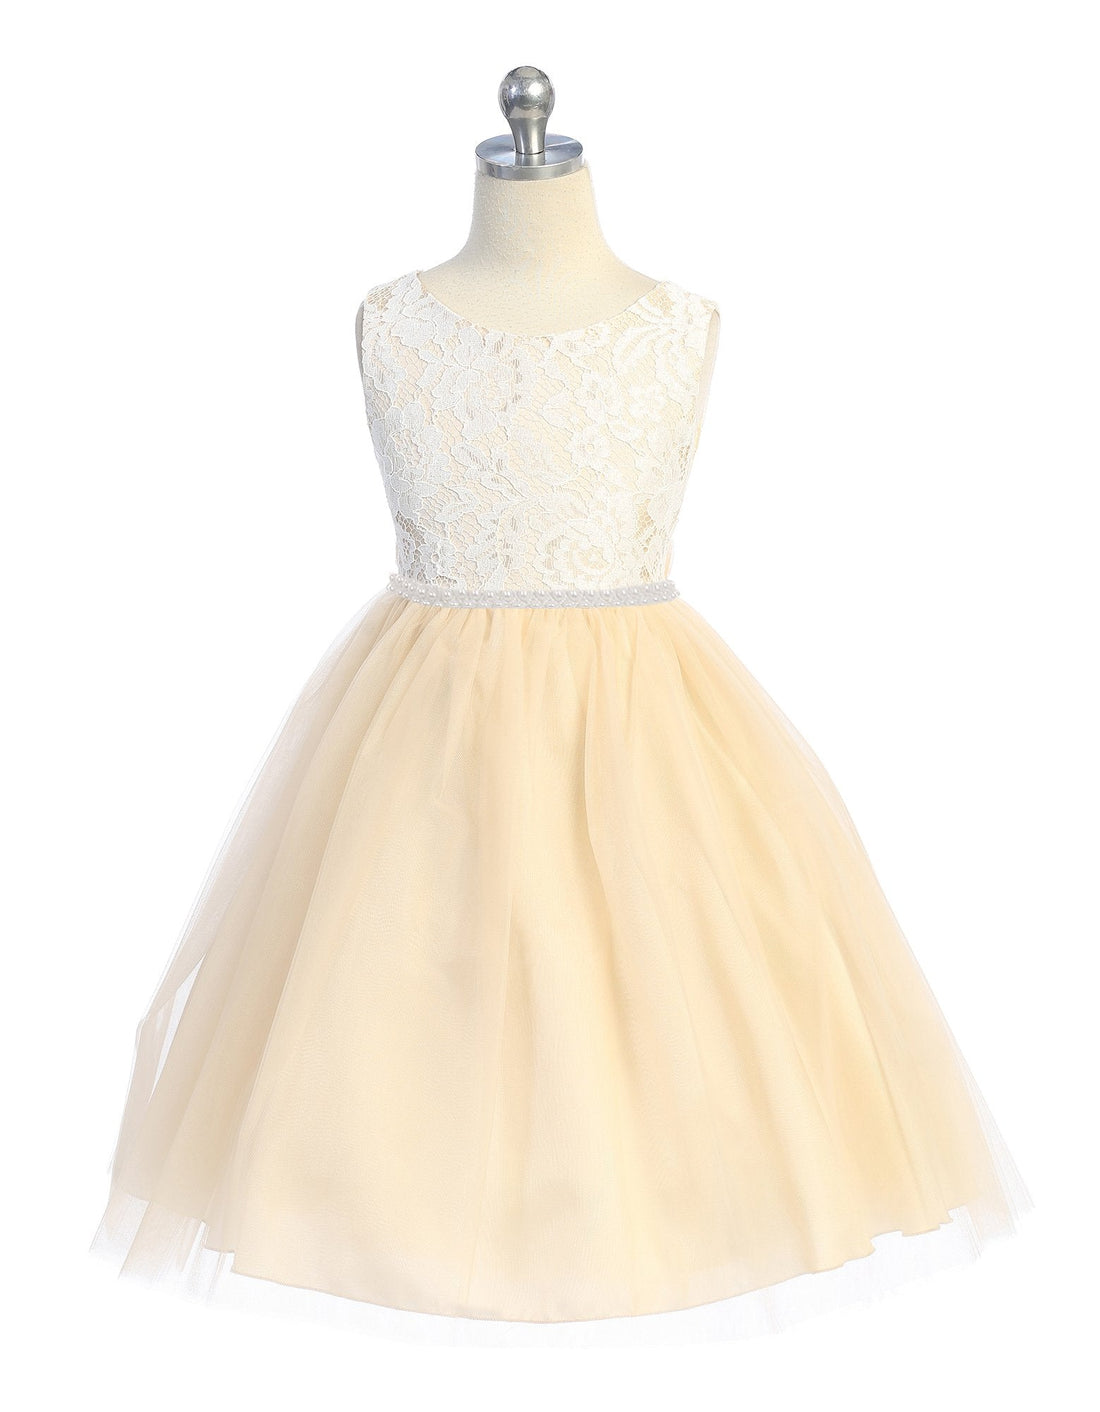 Lace with Thick Pearl Trim Girl Party Dress by AS456C Kids Dream - Girl Formal Dresses